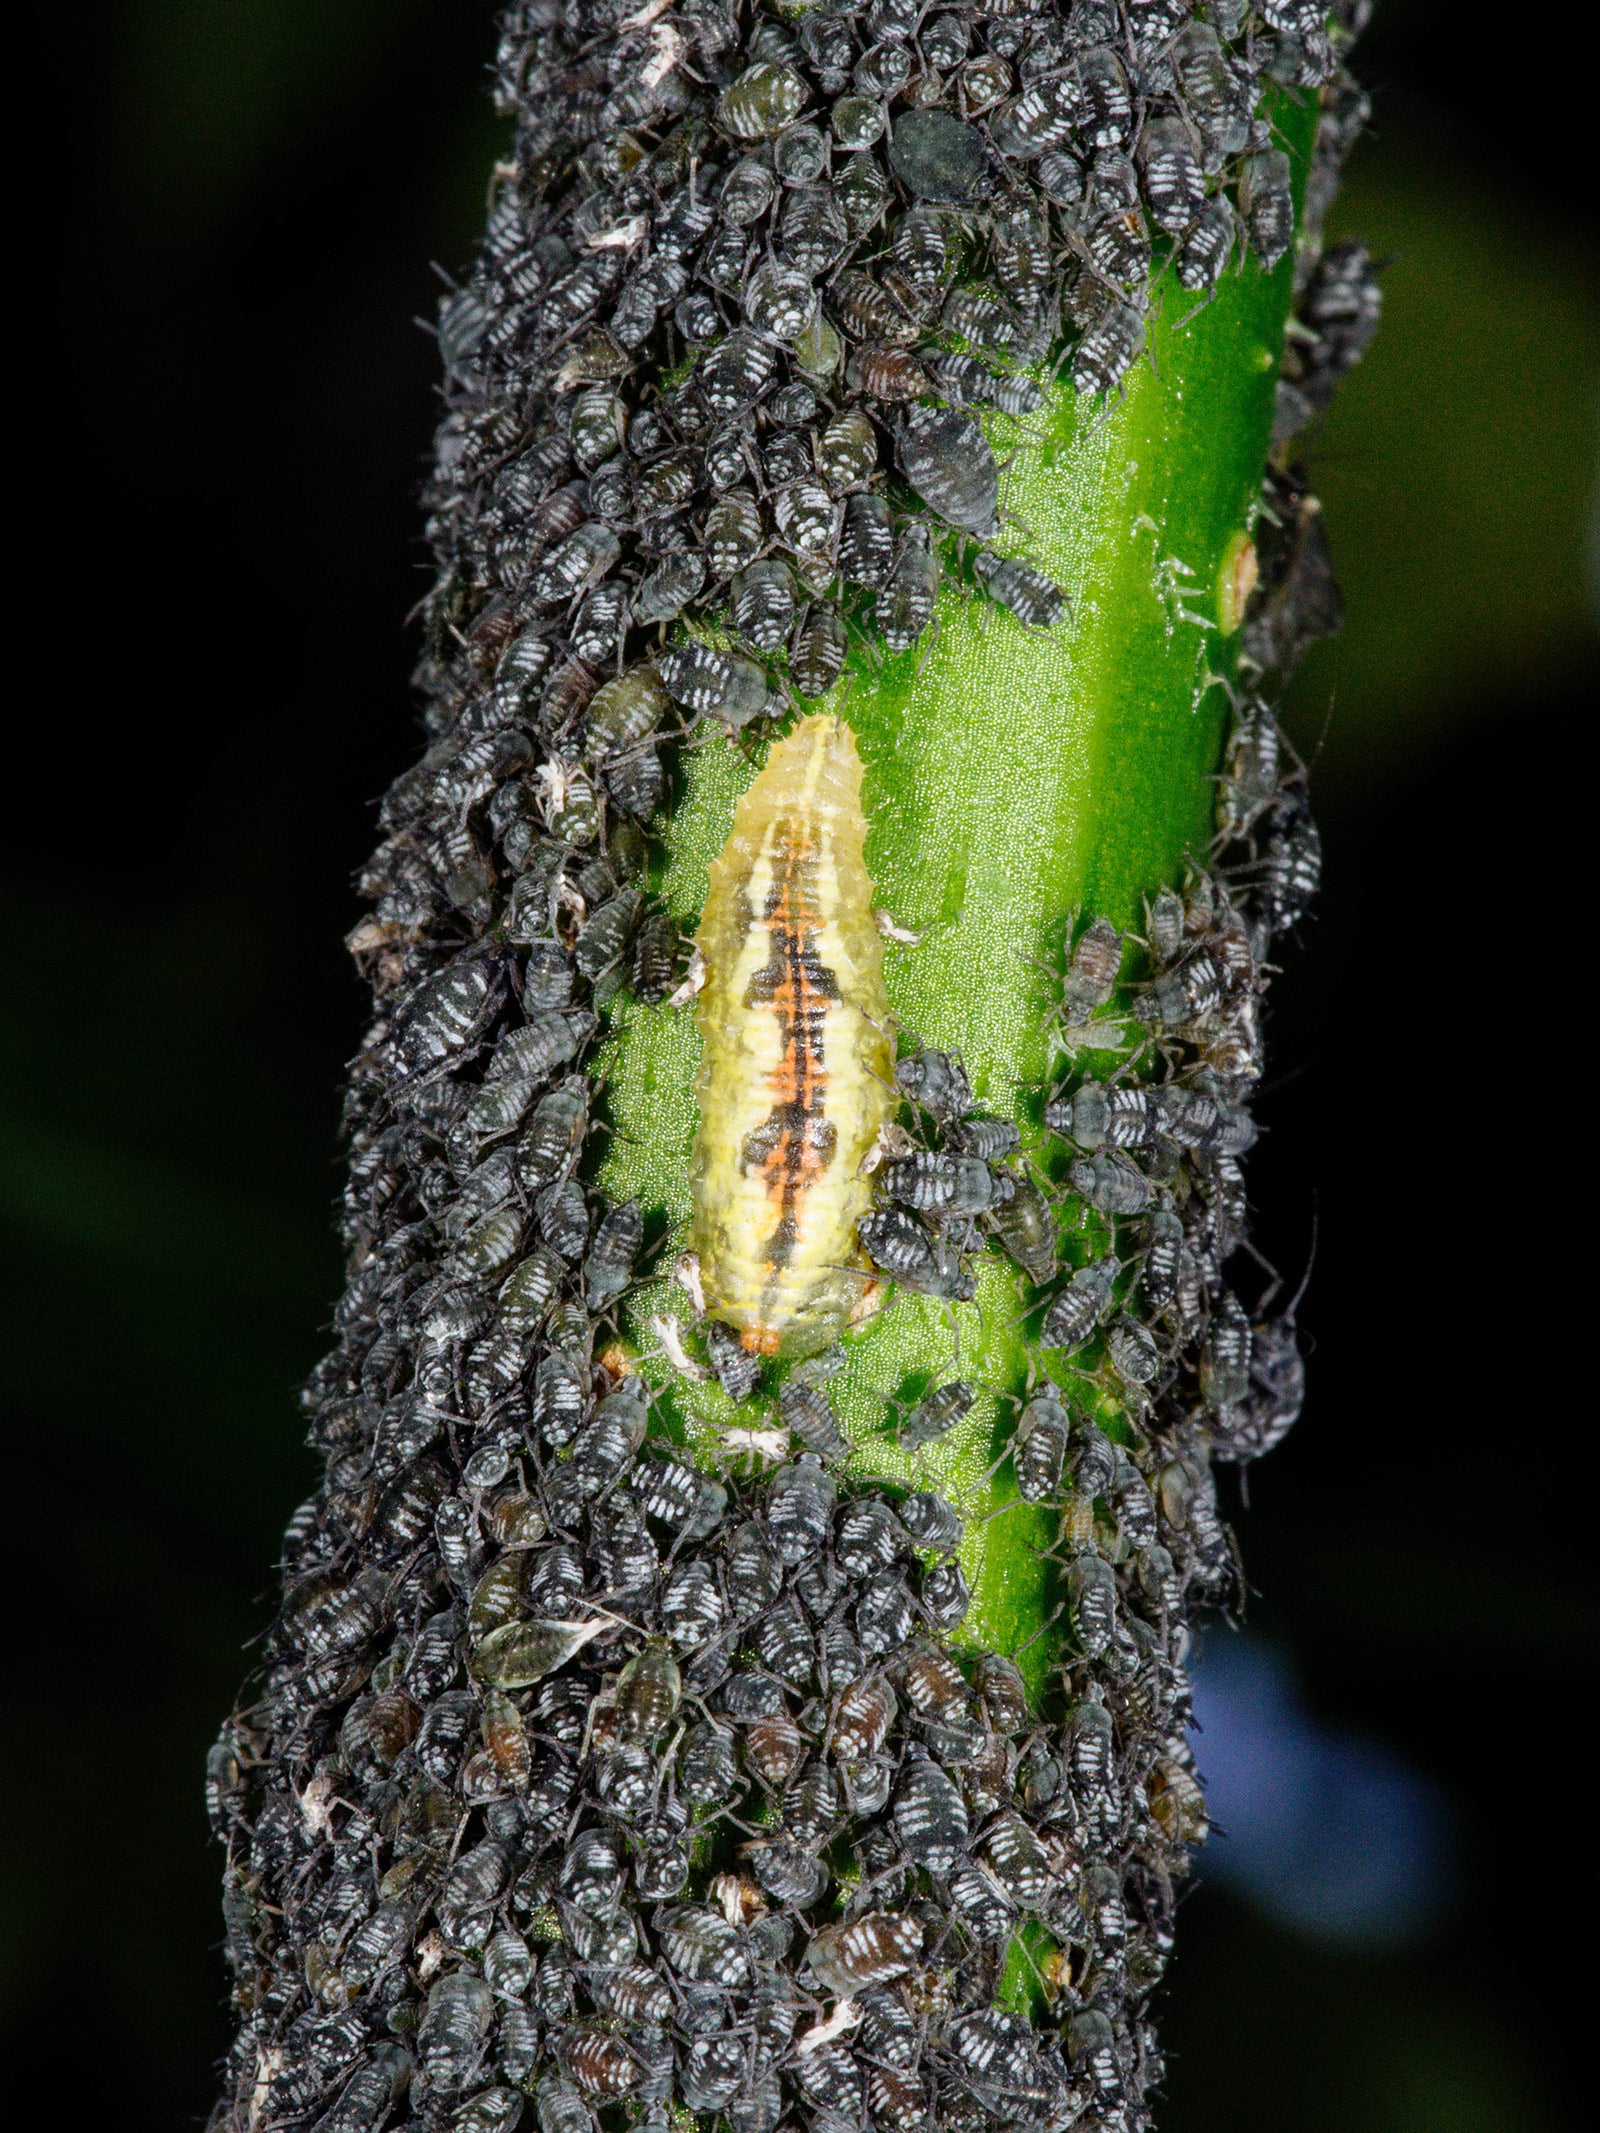 Hoverfly larva sitting on a green stem amidst a large colony of black aphids